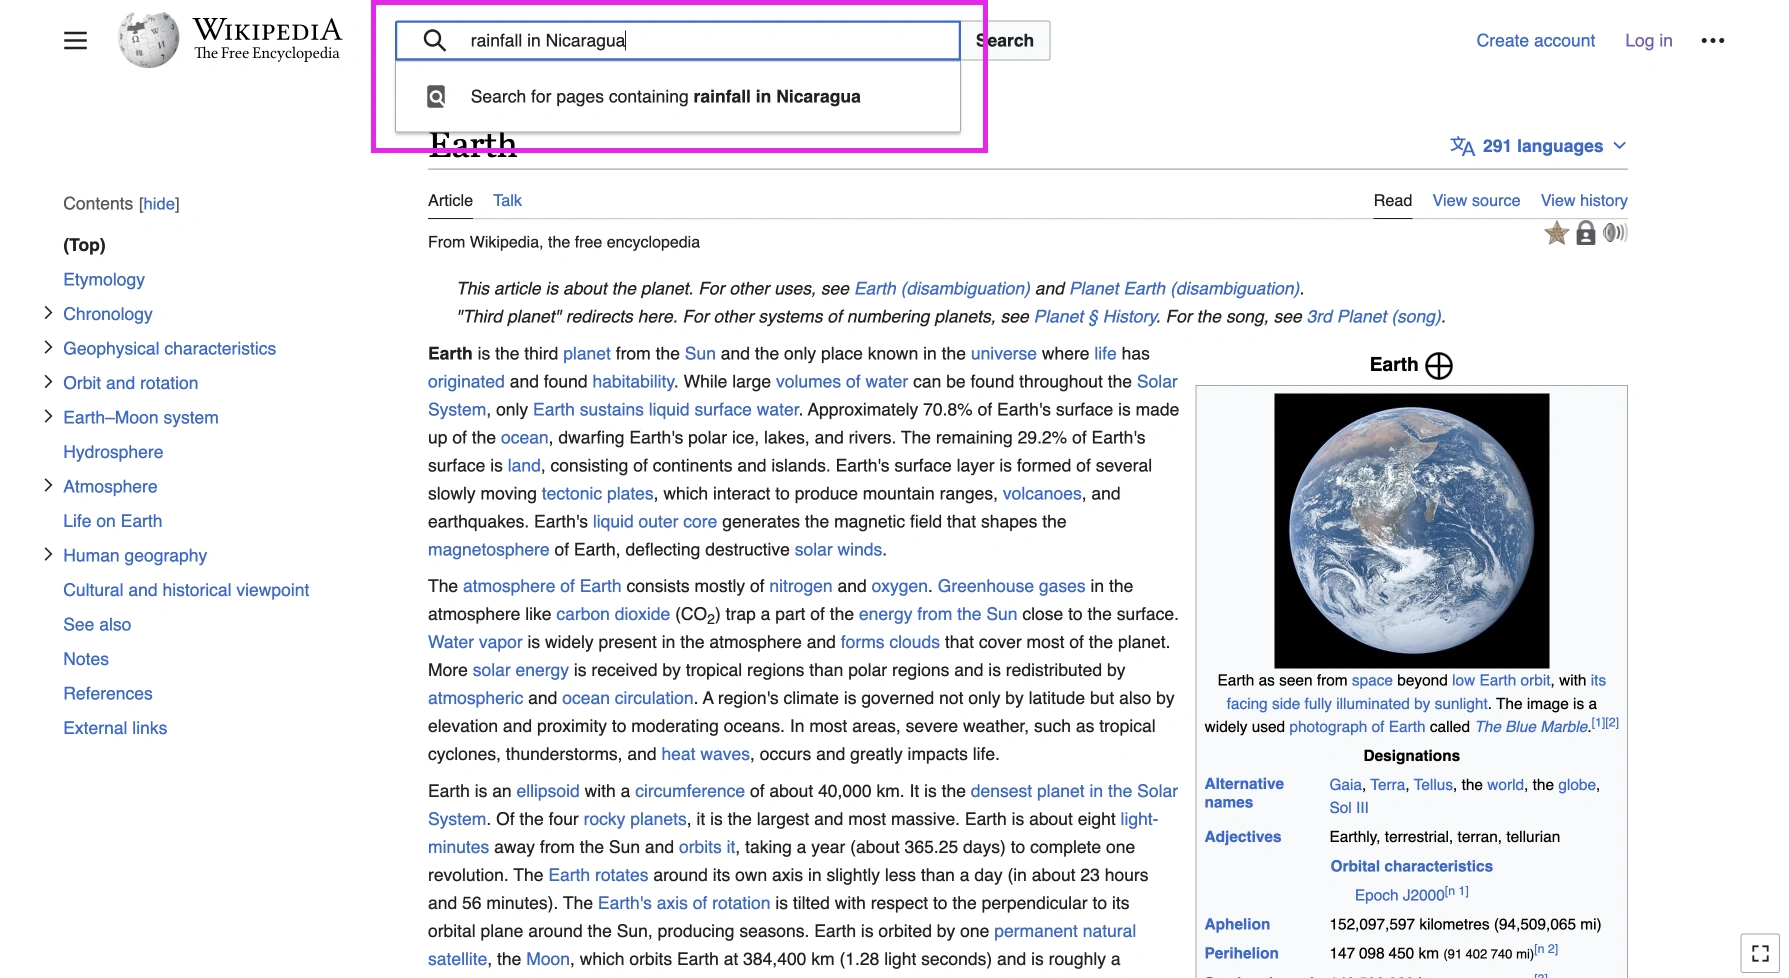 Screenshot of Wikipedia showing empty results in search box